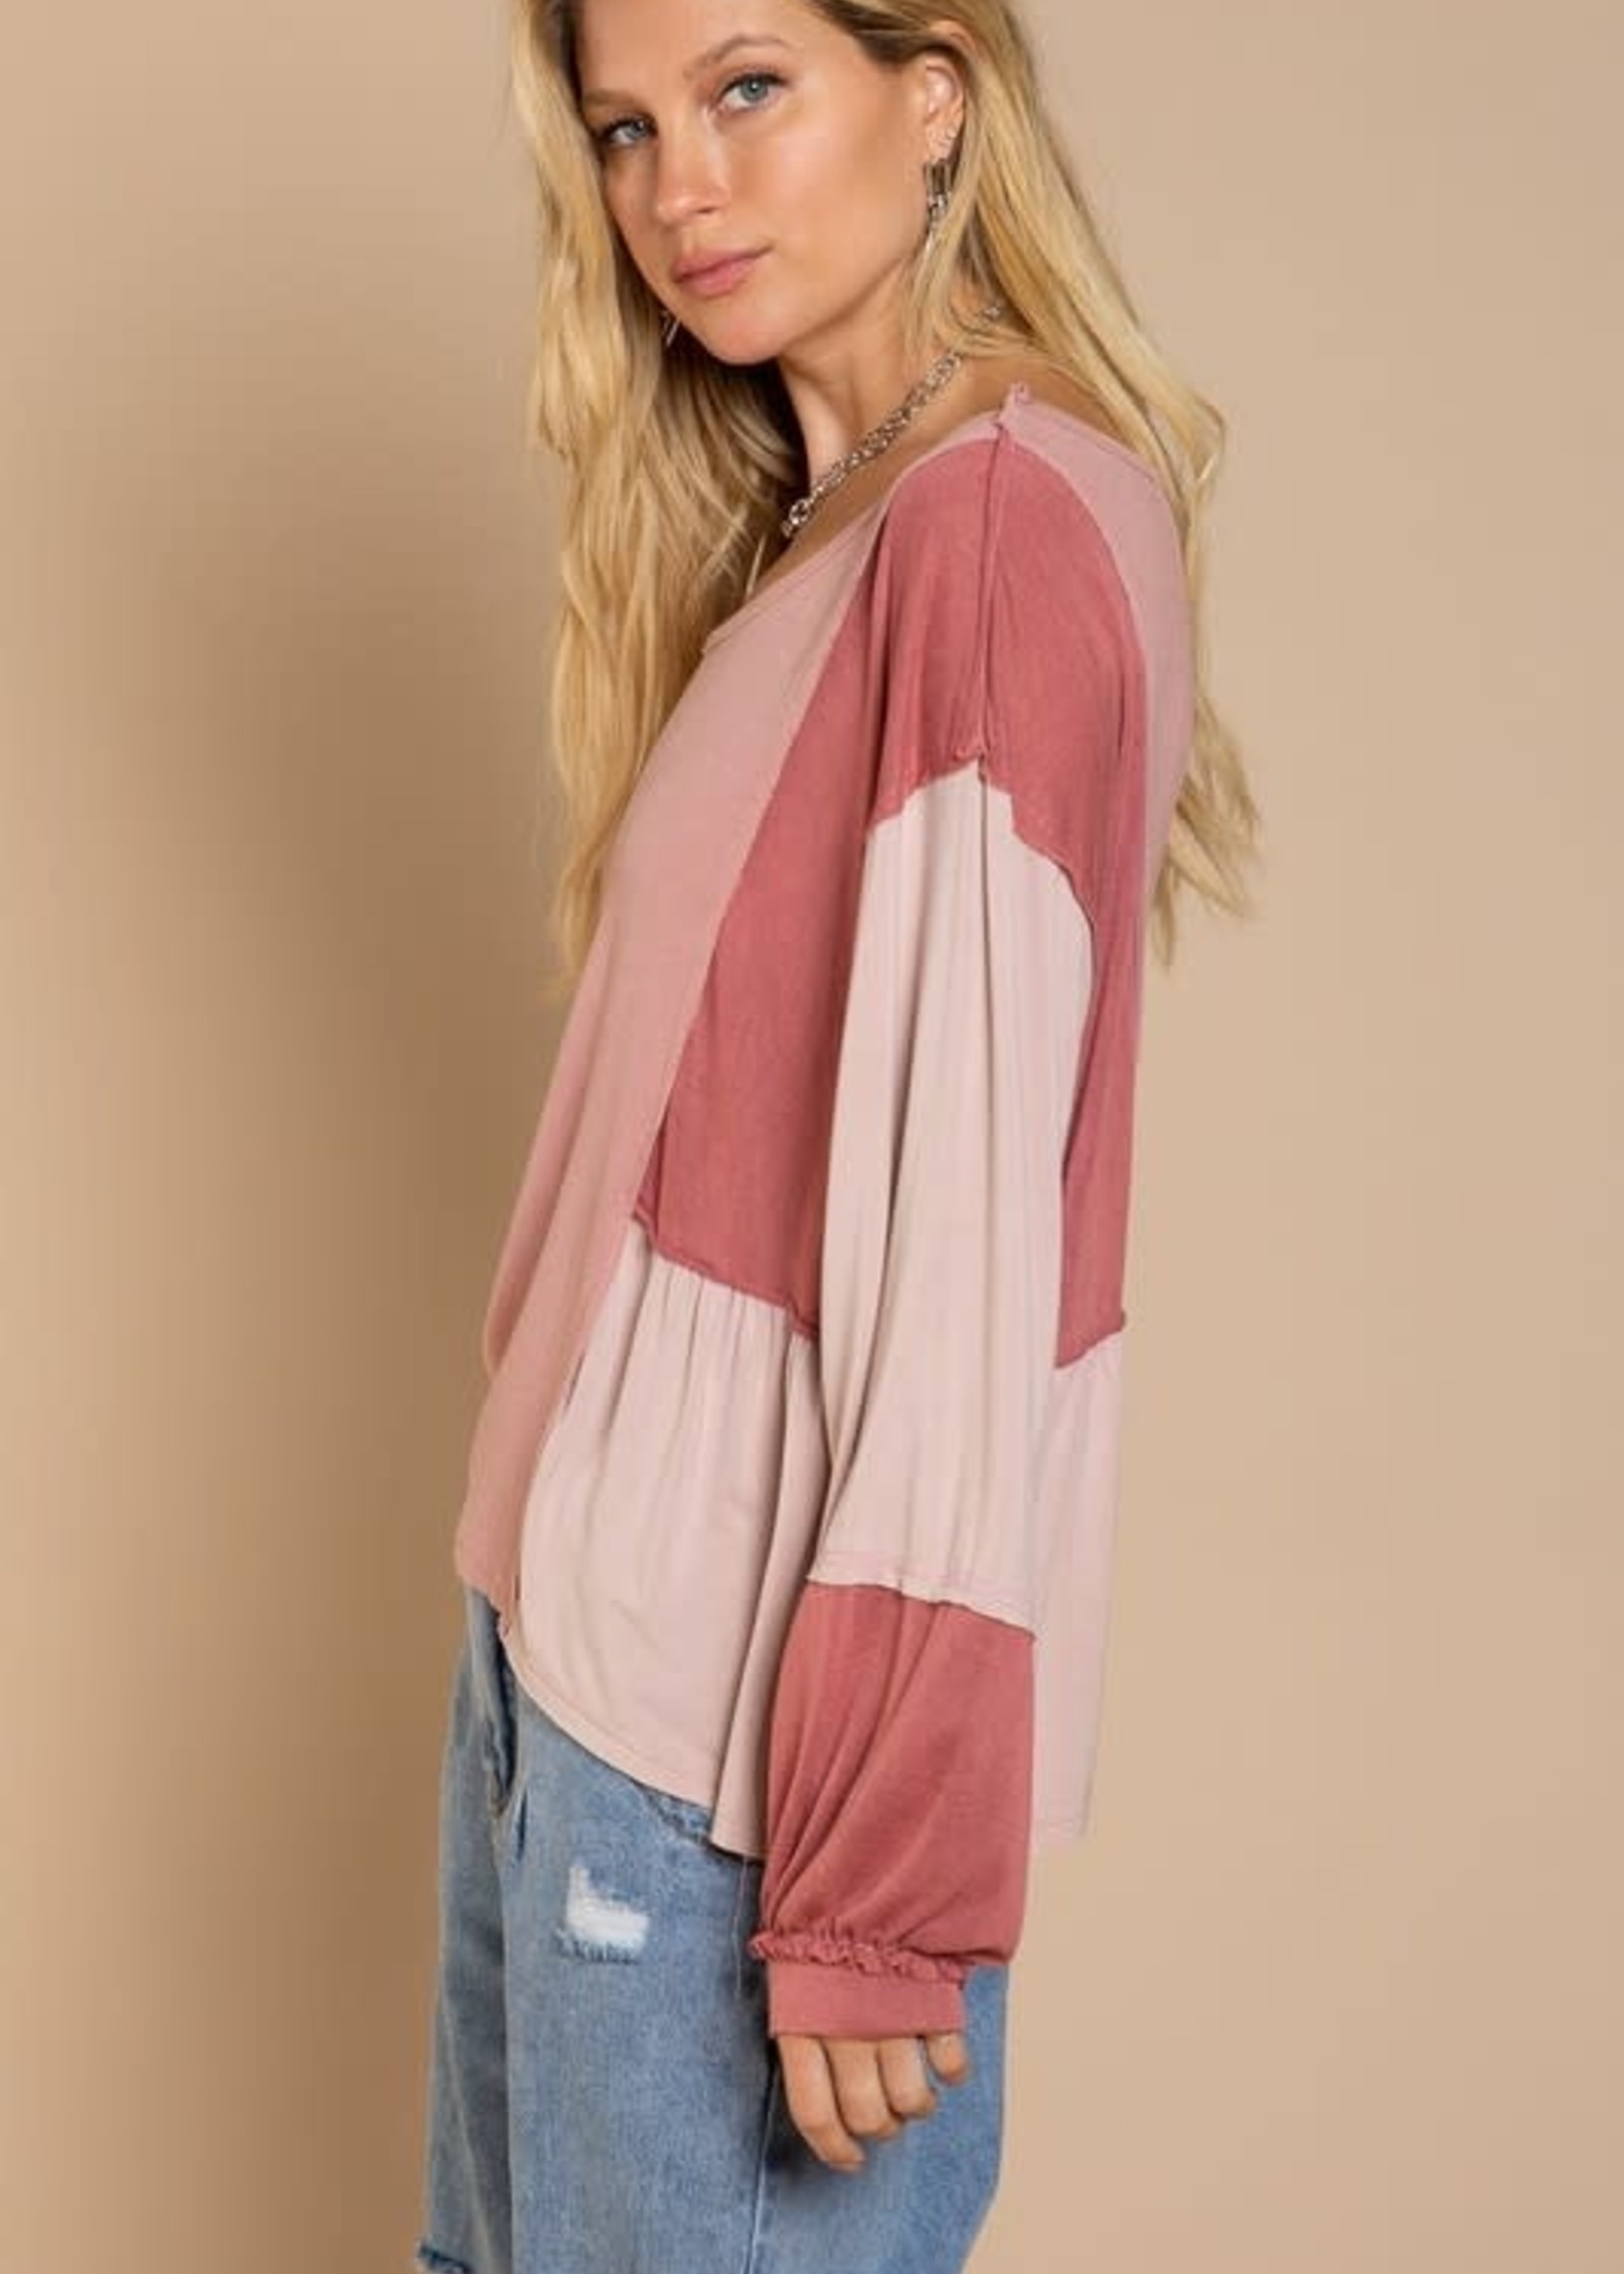 Dusty Rose Patchwork Top